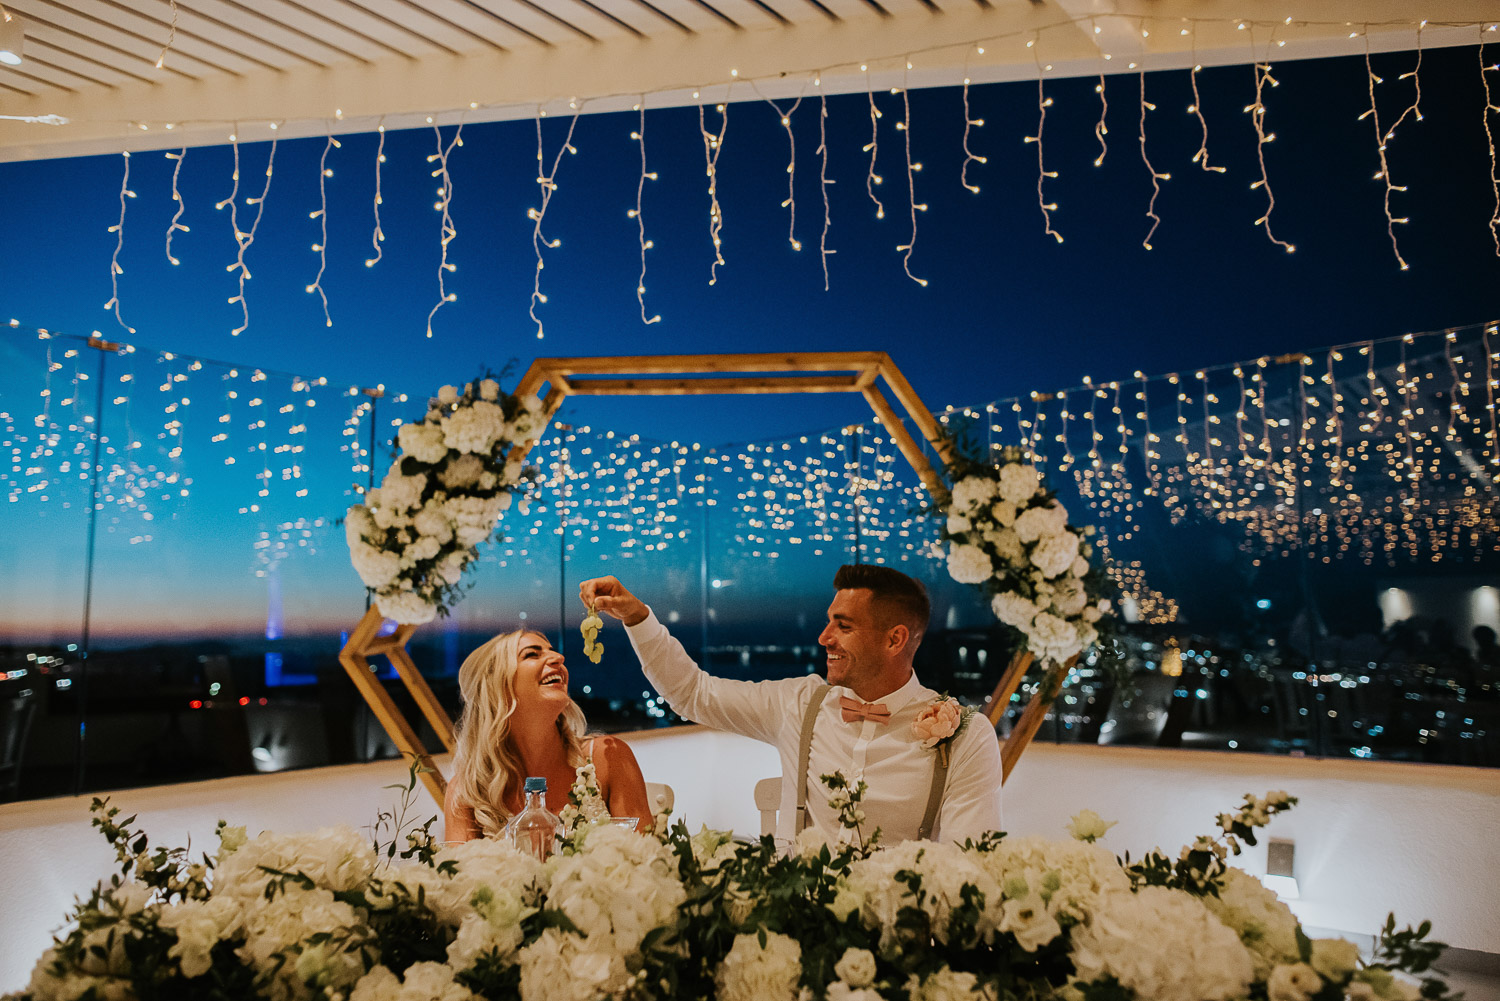 Wedding photographer Santorini: bride and groom laughing as he feeds her grapes surrounded by fairy lights by Ben and Vesna.